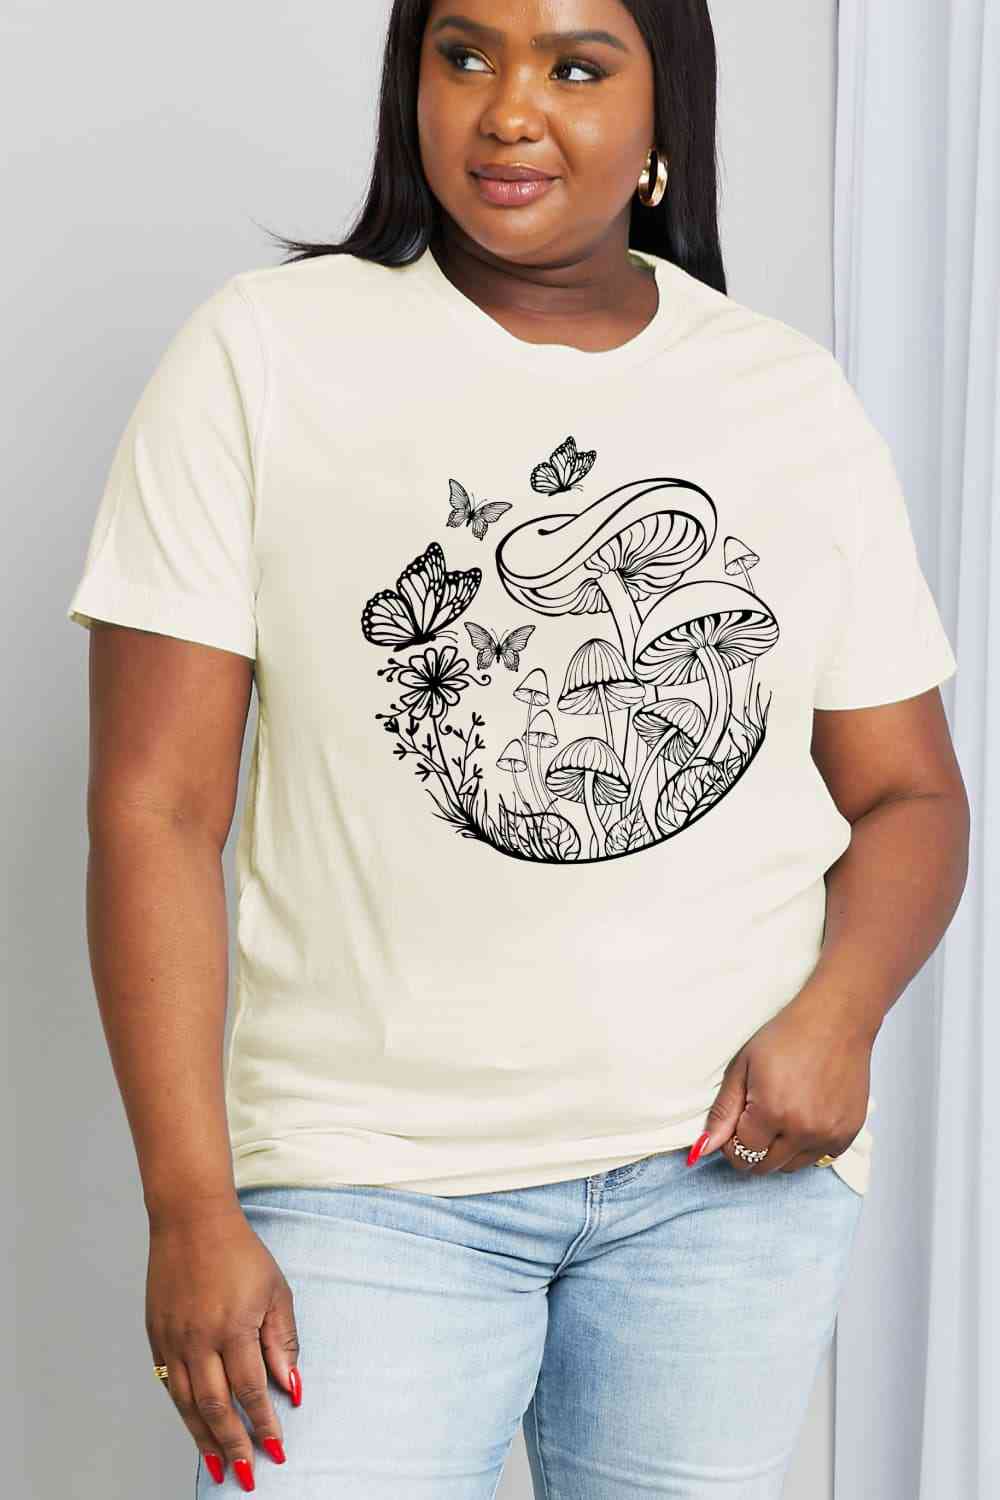 Butterfly & Mushroom Graphic Cotton Tee - White / S - T-Shirts - Shirts & Tops - 6 - 2024